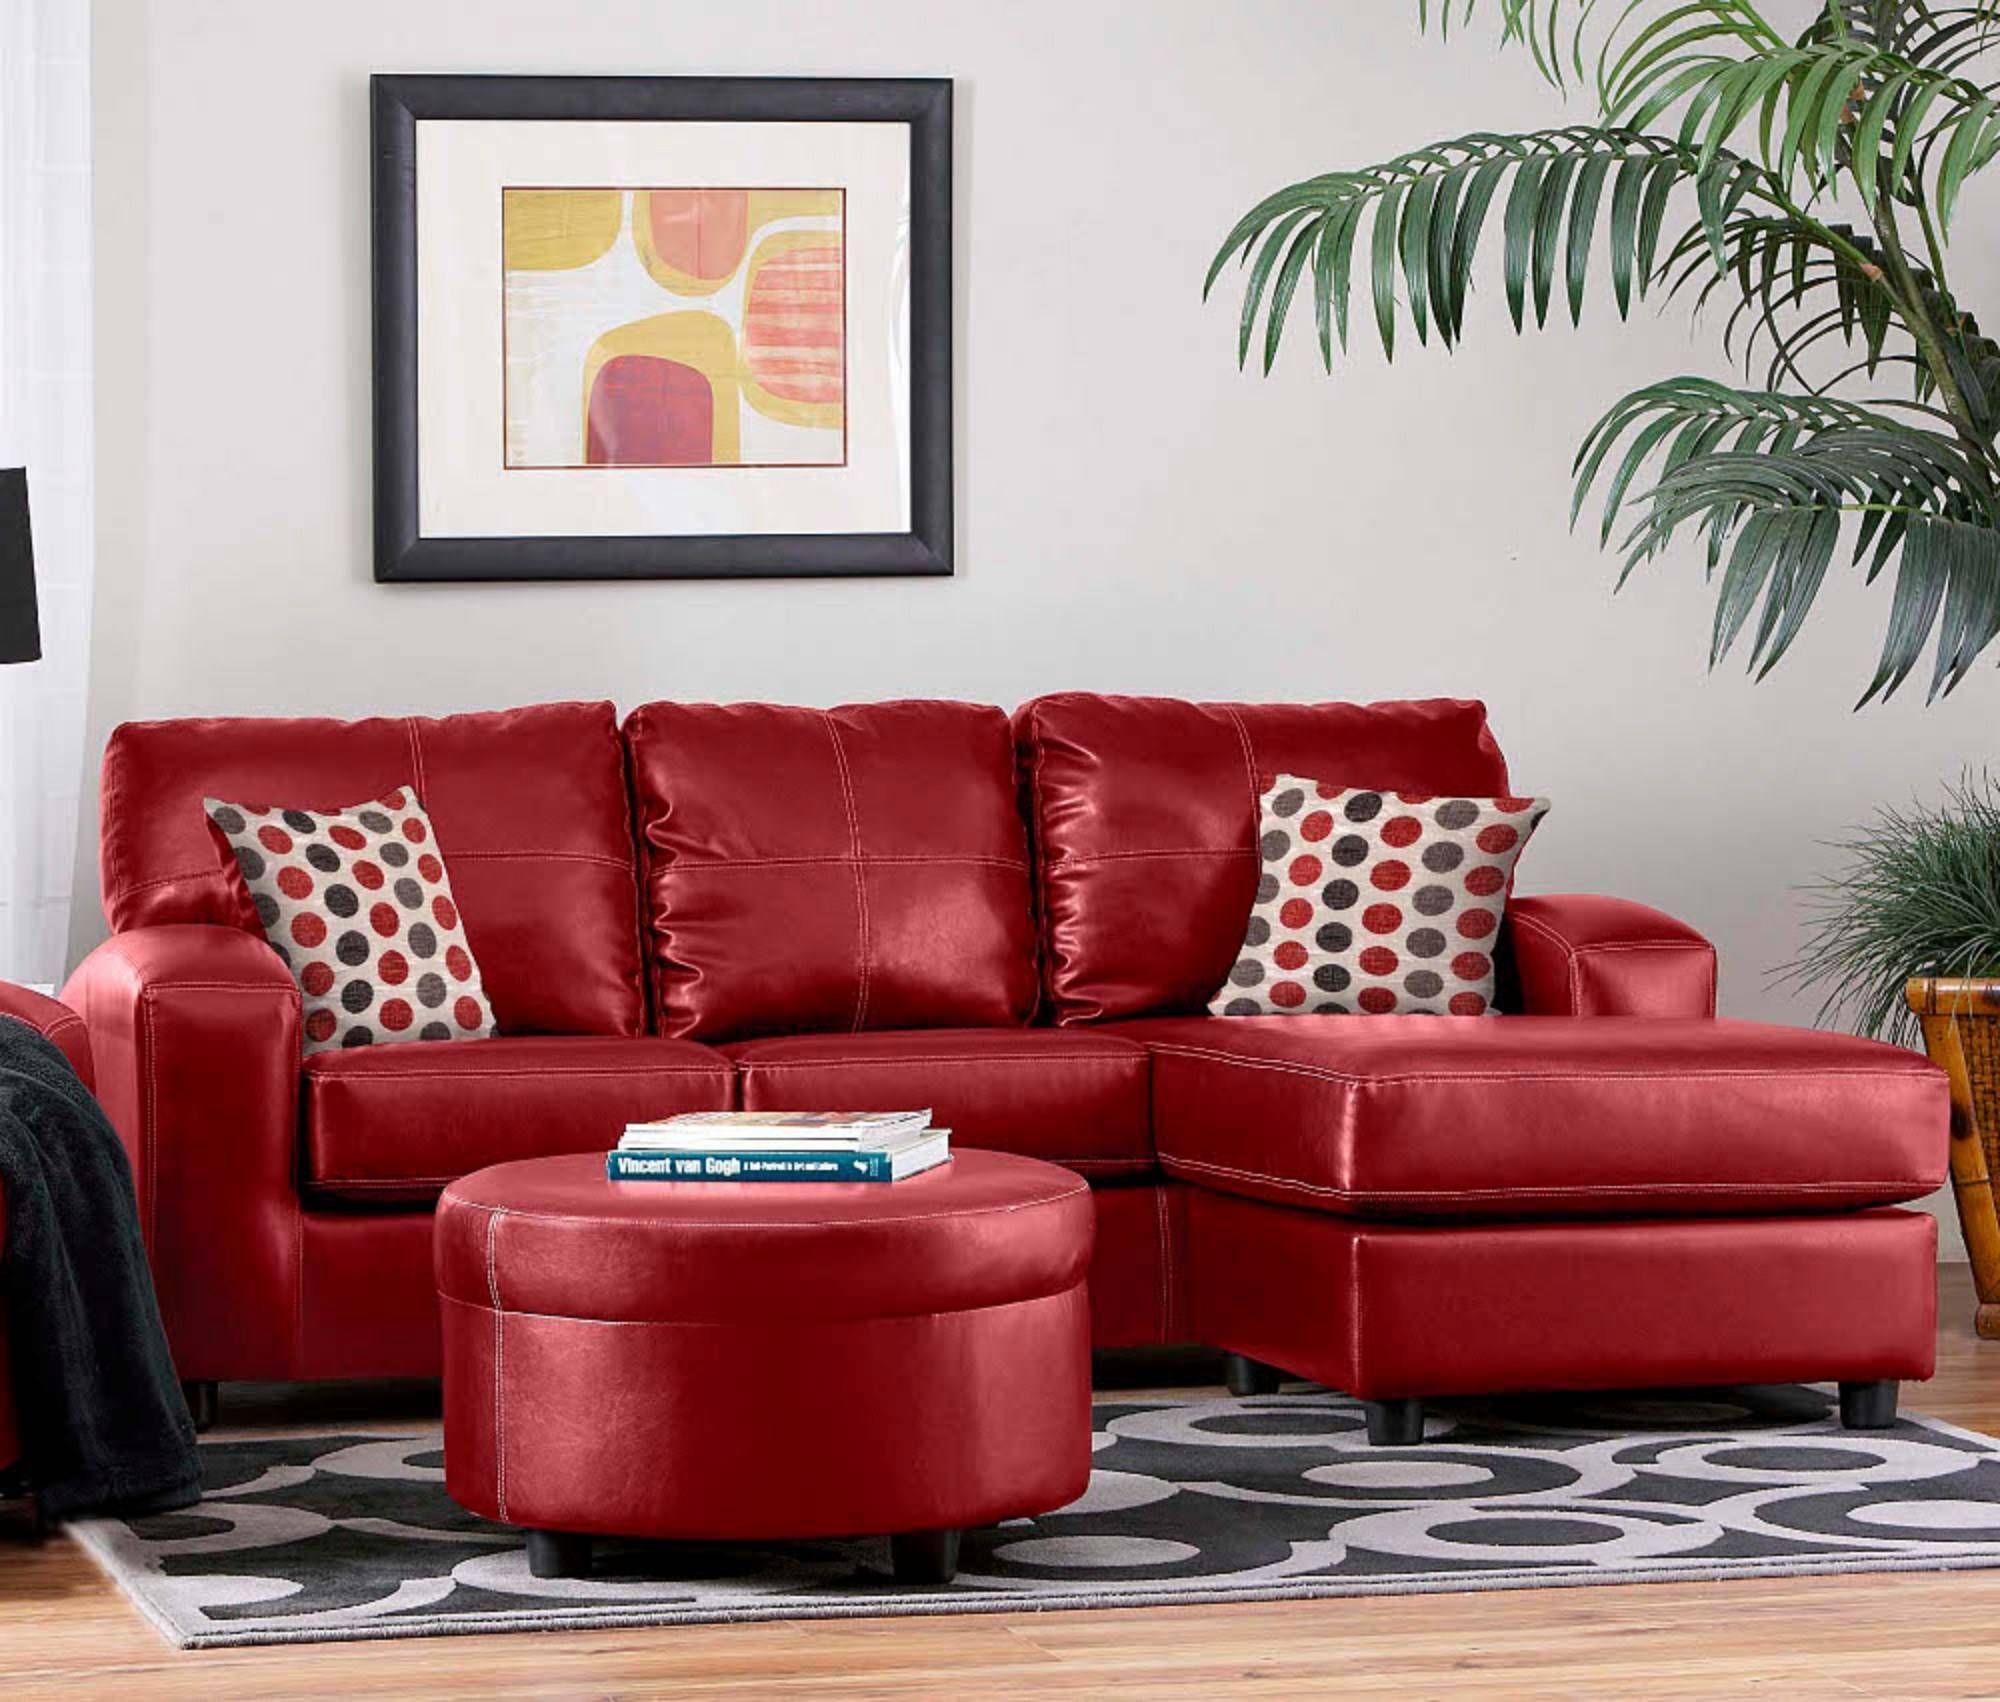 Sofas Center : Red Leather Sectional Sofa Stupendous Photos Design With Regard To Dark Red Leather Couches (View 14 of 15)